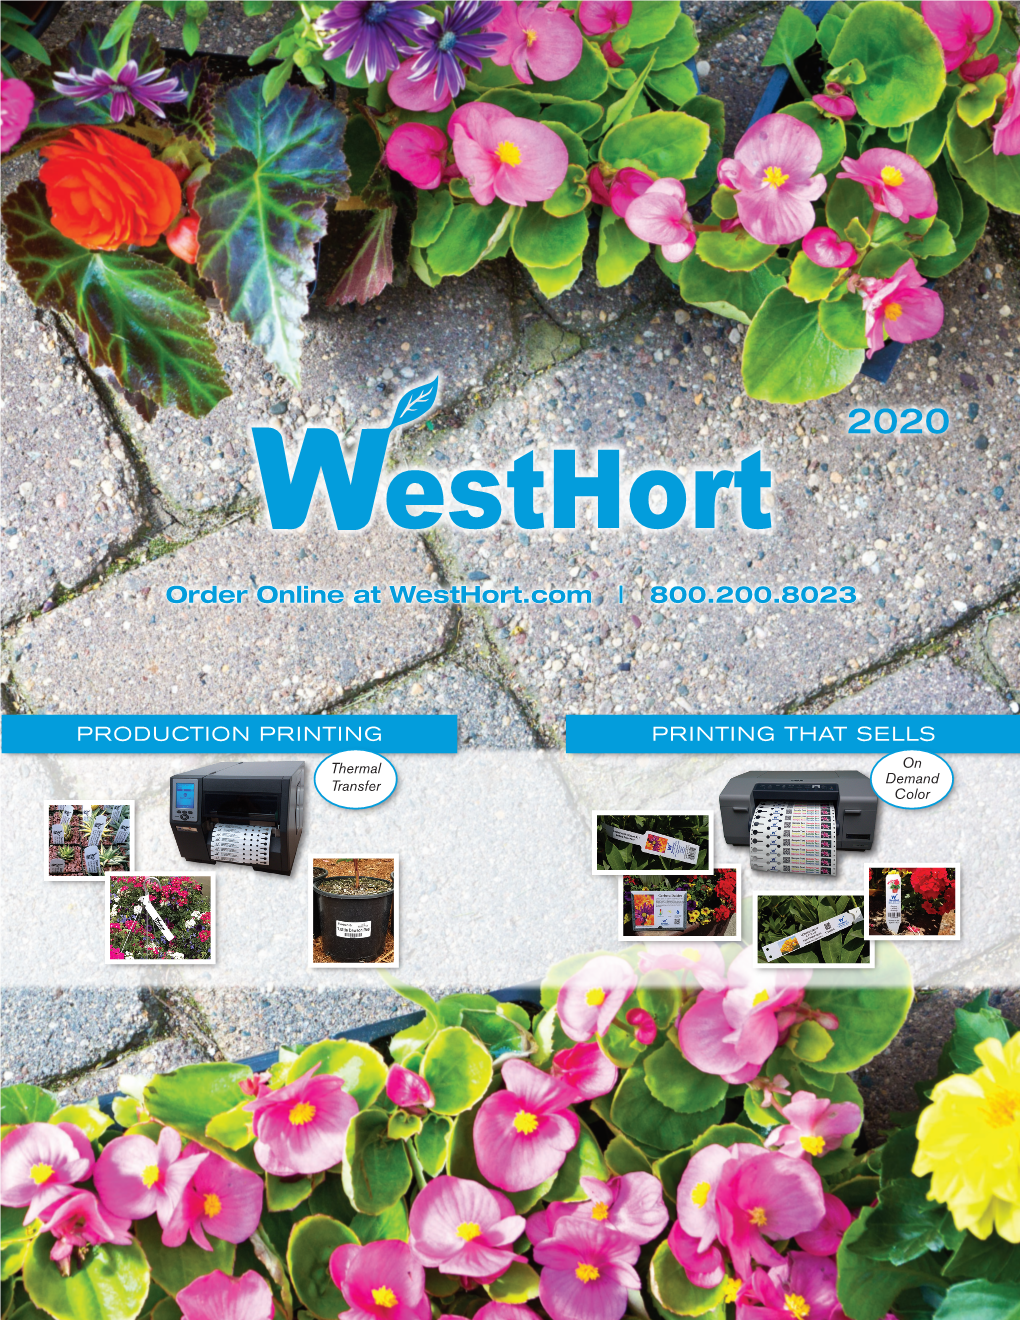 Order Online at Westhort.Com | 800.200.8023 Your Complete Source for Nursery Tagging • Labeling • Printing